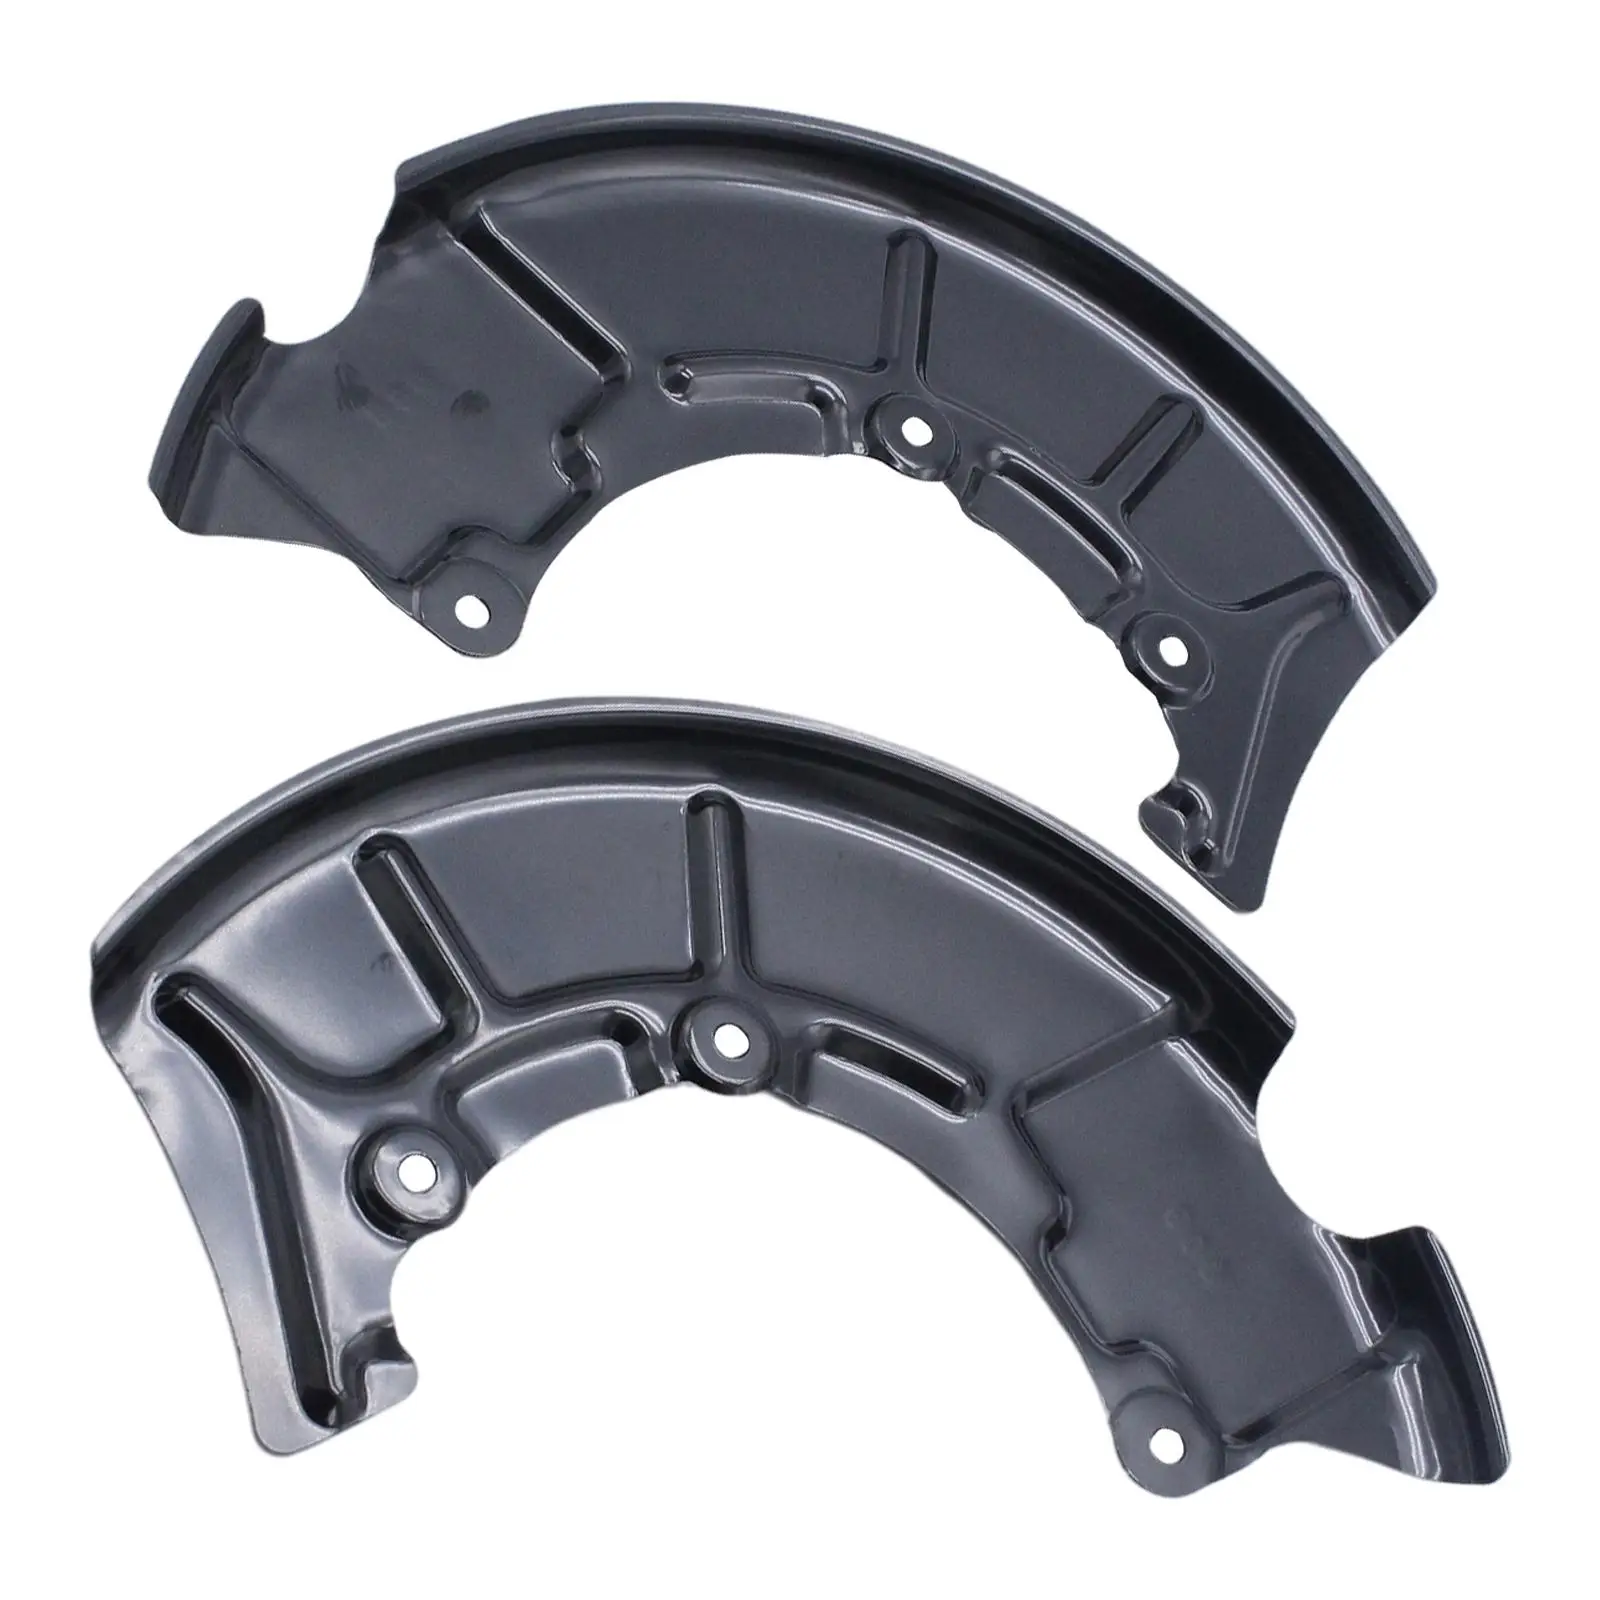 2x Front Disc Brake Cover Dust Shield Splashguard for Golf 2000-2004 1J0615311A Replacement Acc